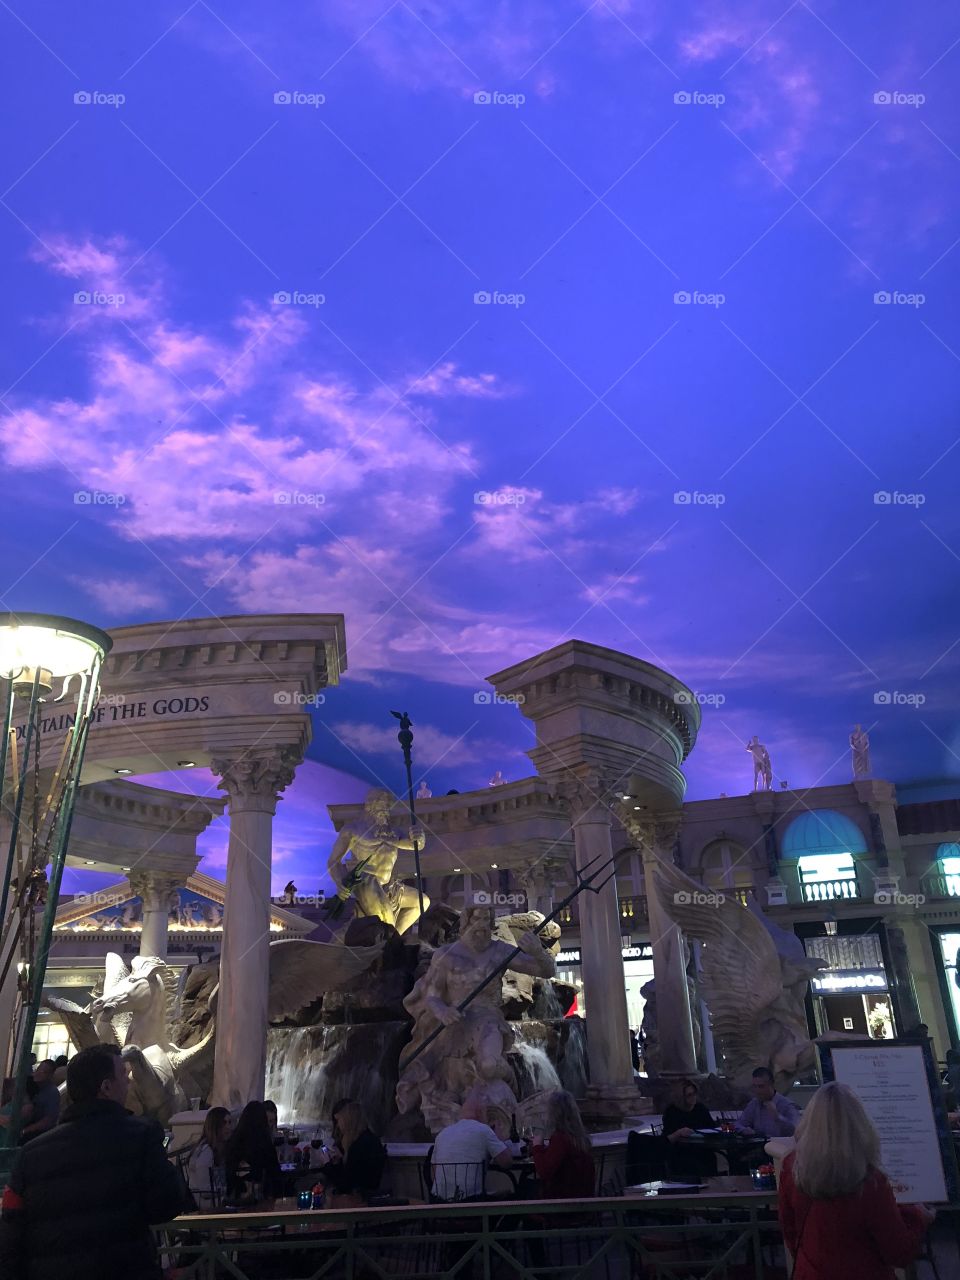 Photo taken in the great city of Las Vegas. The sky looked amazing that night and I just had to snap a picture. 